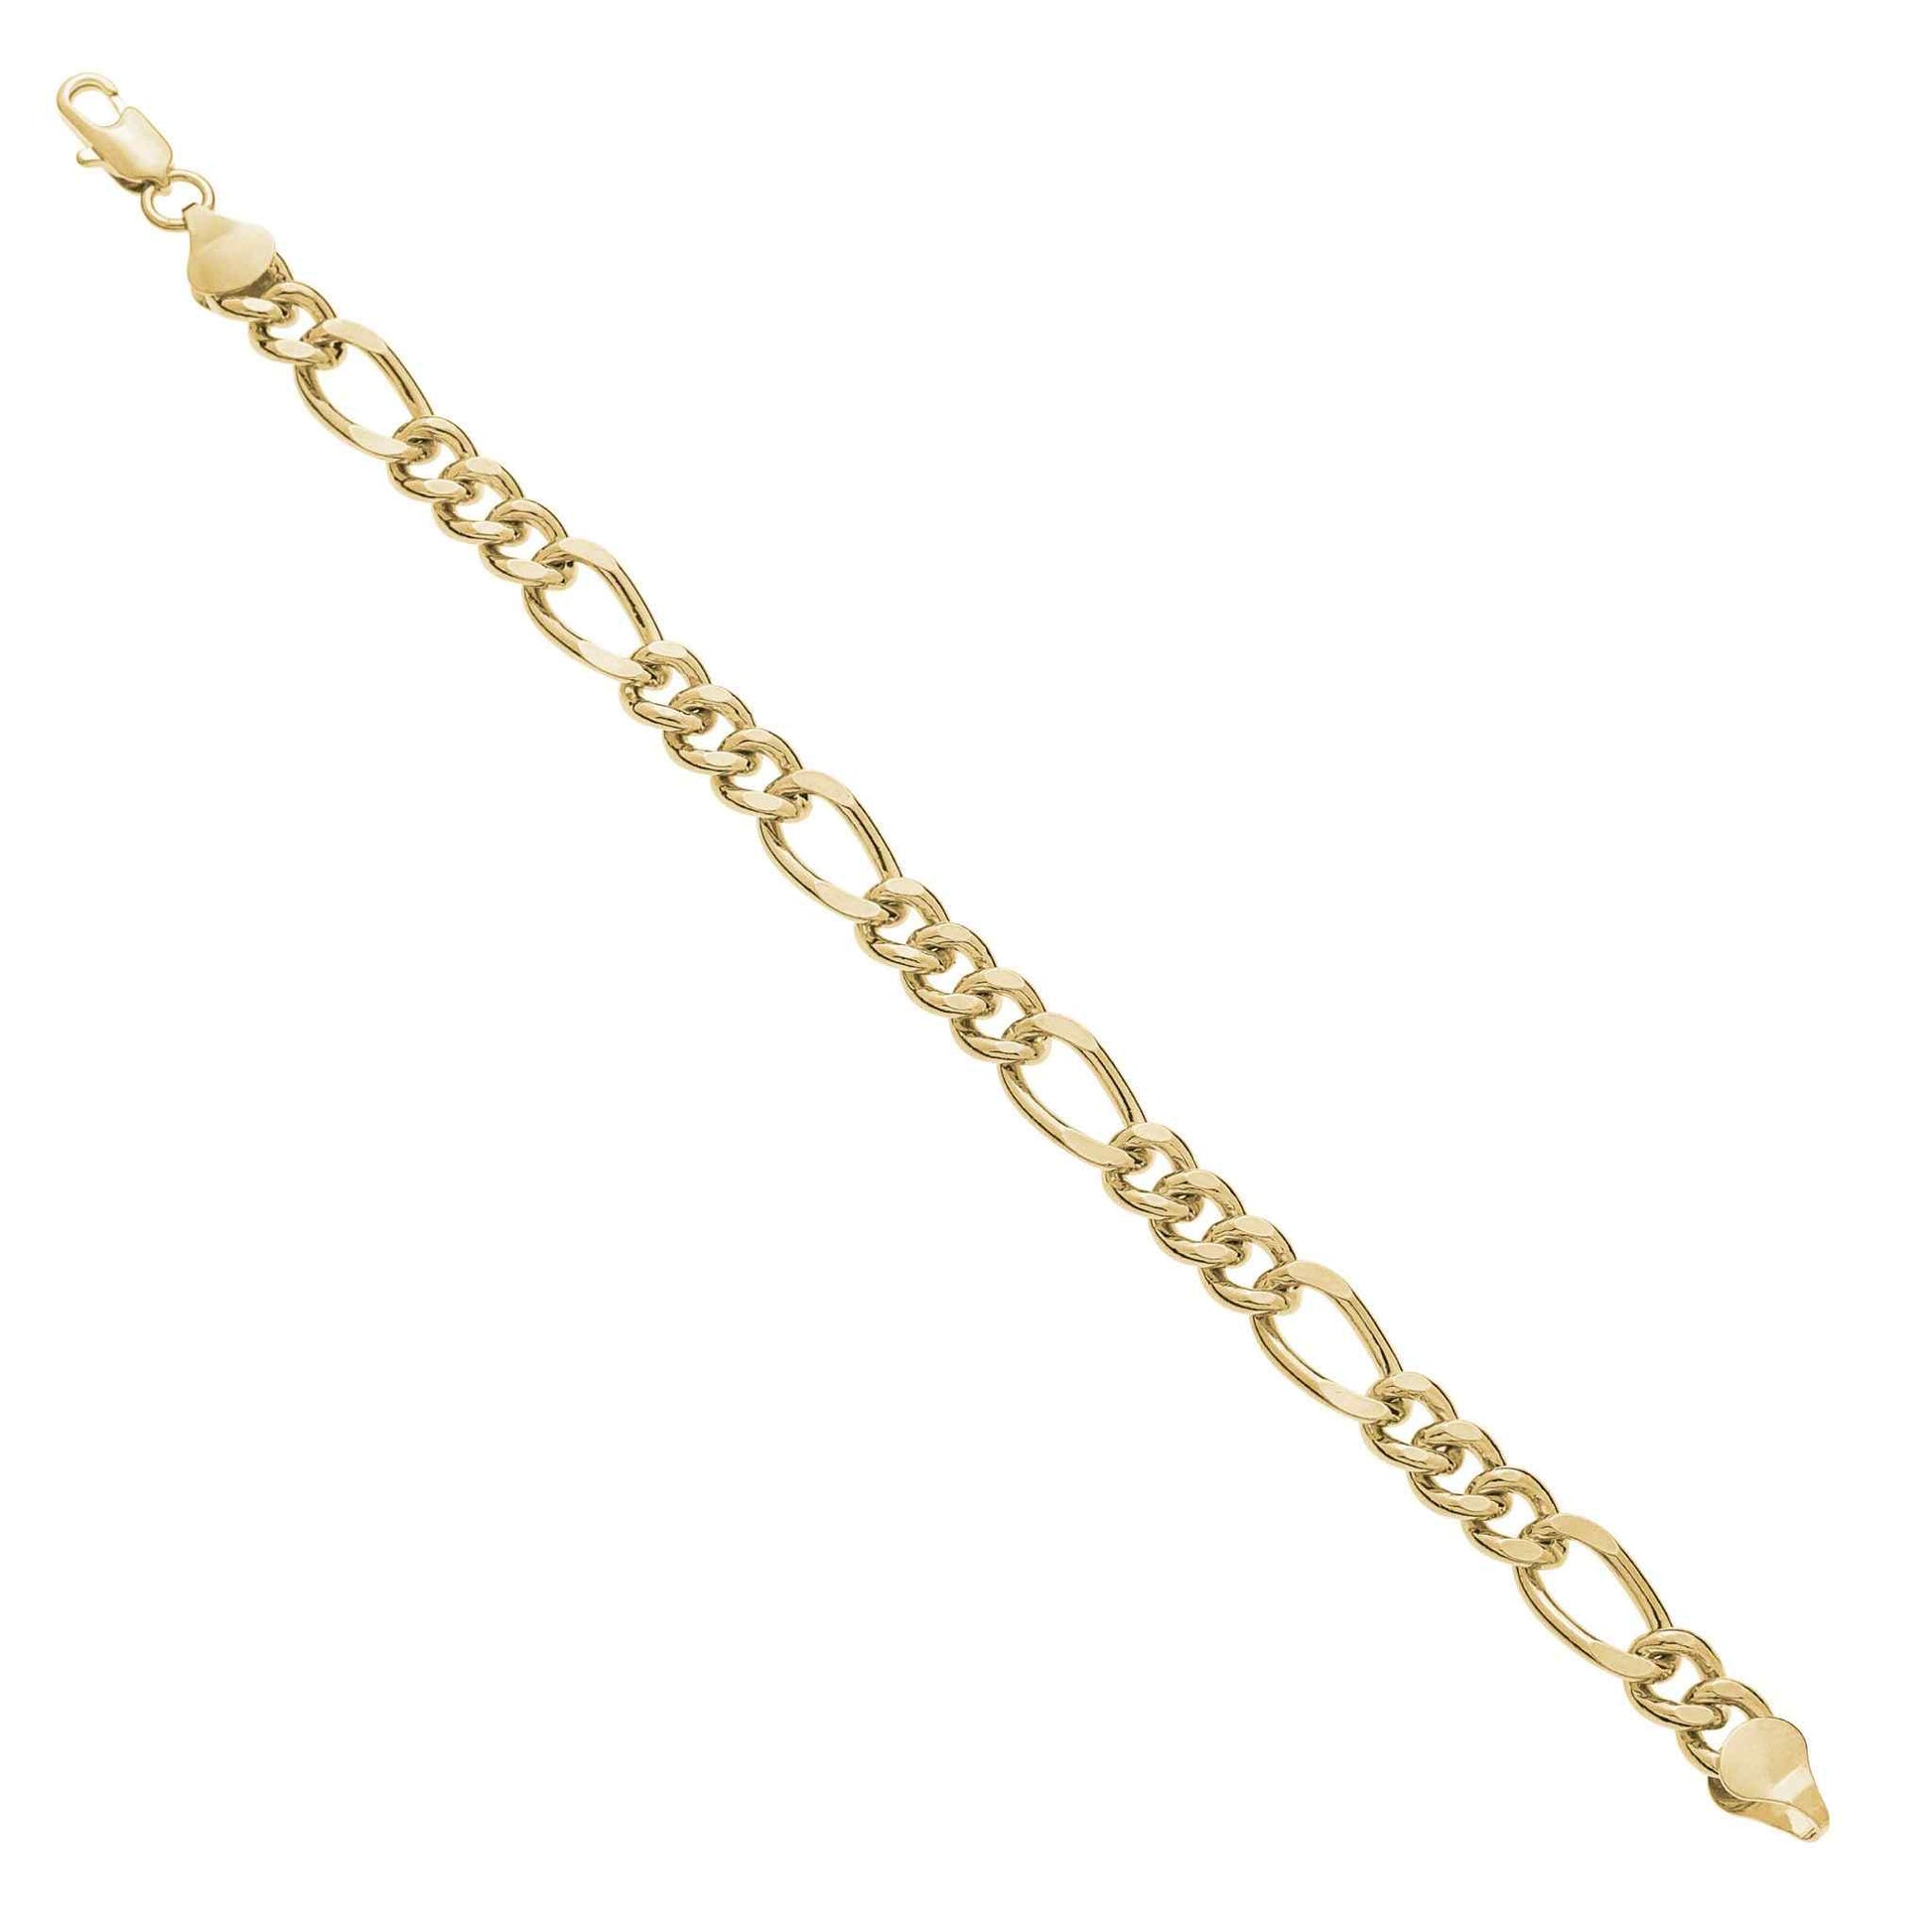 A 8.5" 7mm figaro chain bracelet displayed on a neutral white background.